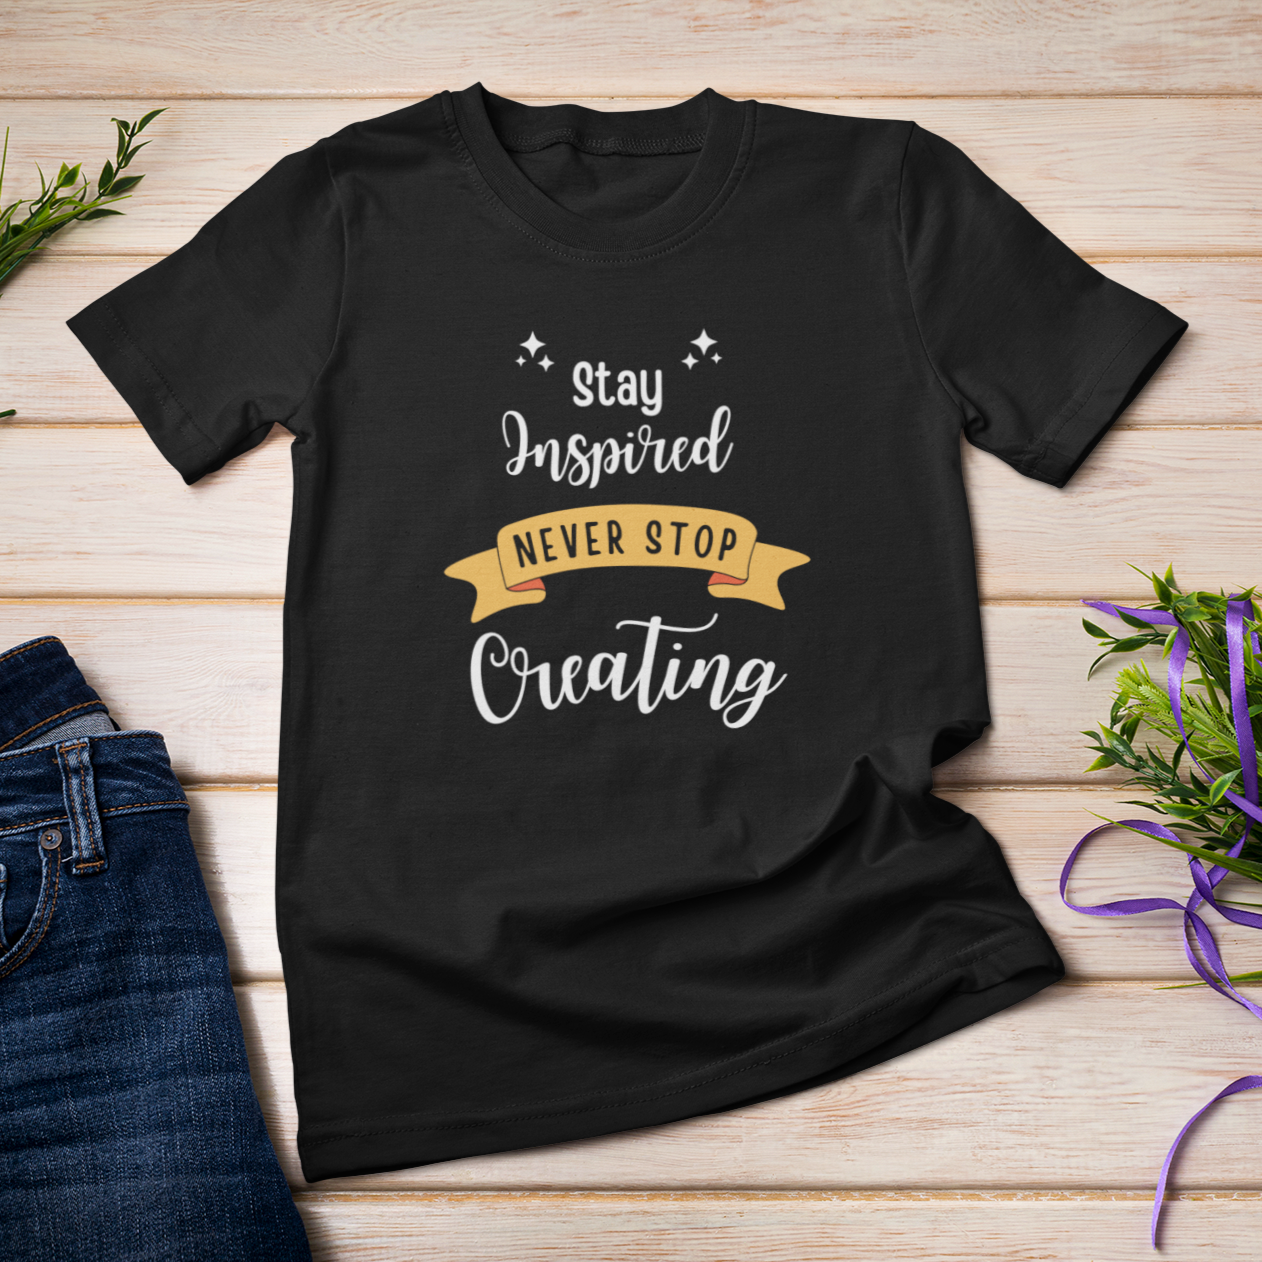 Story of Awakening Lifestyle Community Spirituality Relationships Love Light Meditation Oneness Earth Balance Healing Shop Store Charity Tree Nature Read Write T shirt Tops Tees Clothing Women Horoscope Organic Cotton Stay Inspired Never Stop Creating Quote